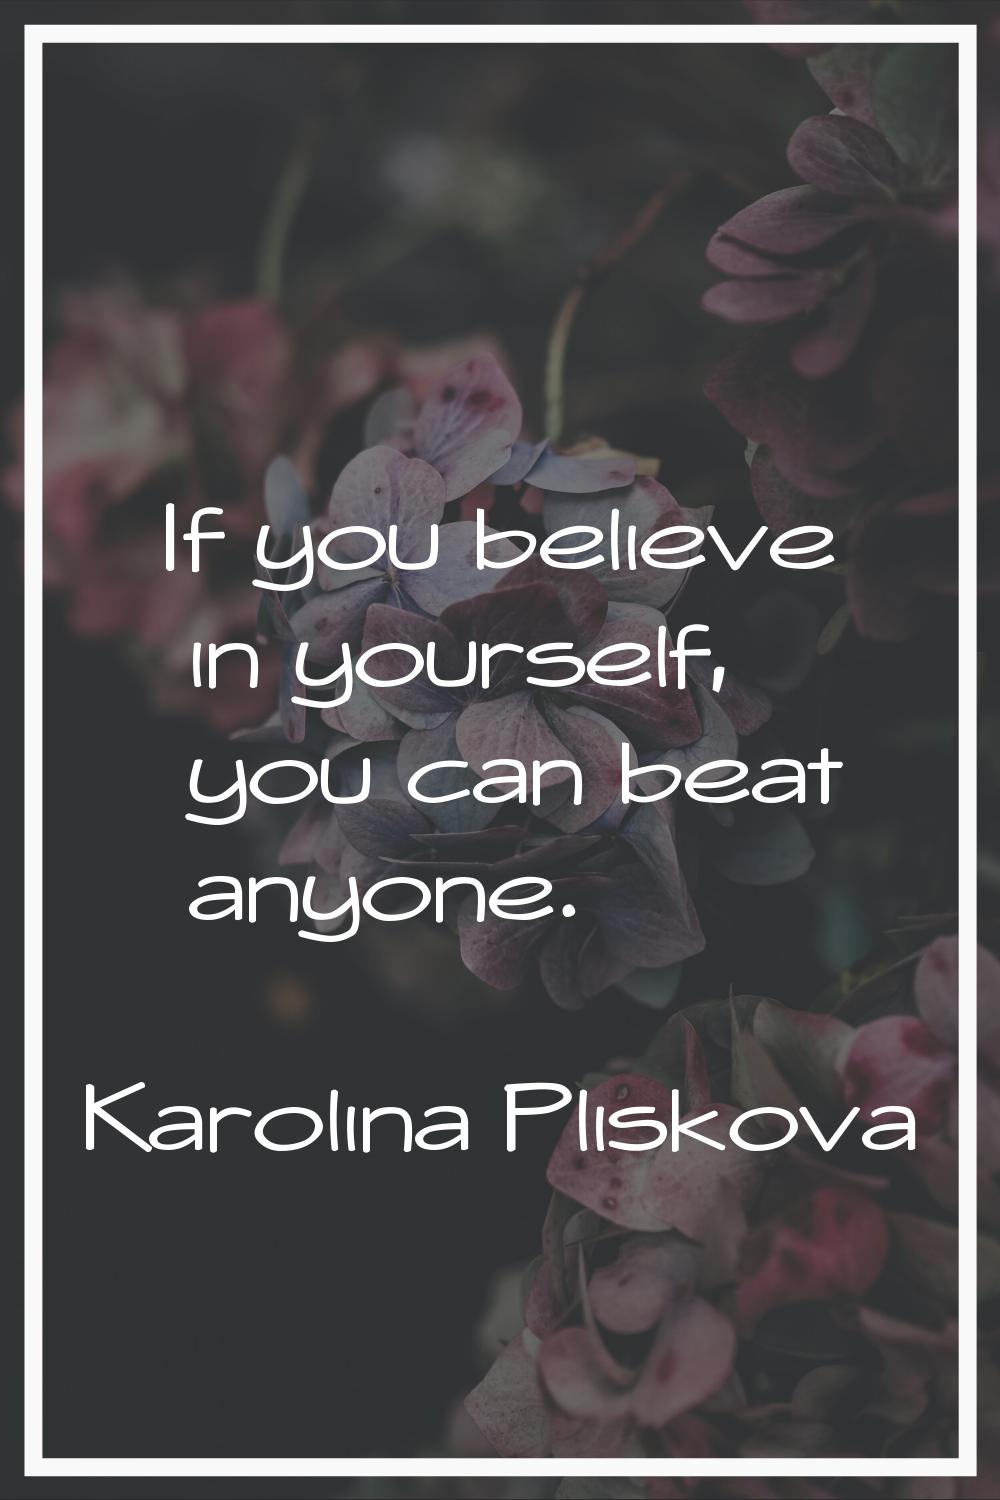 If you believe in yourself, you can beat anyone.